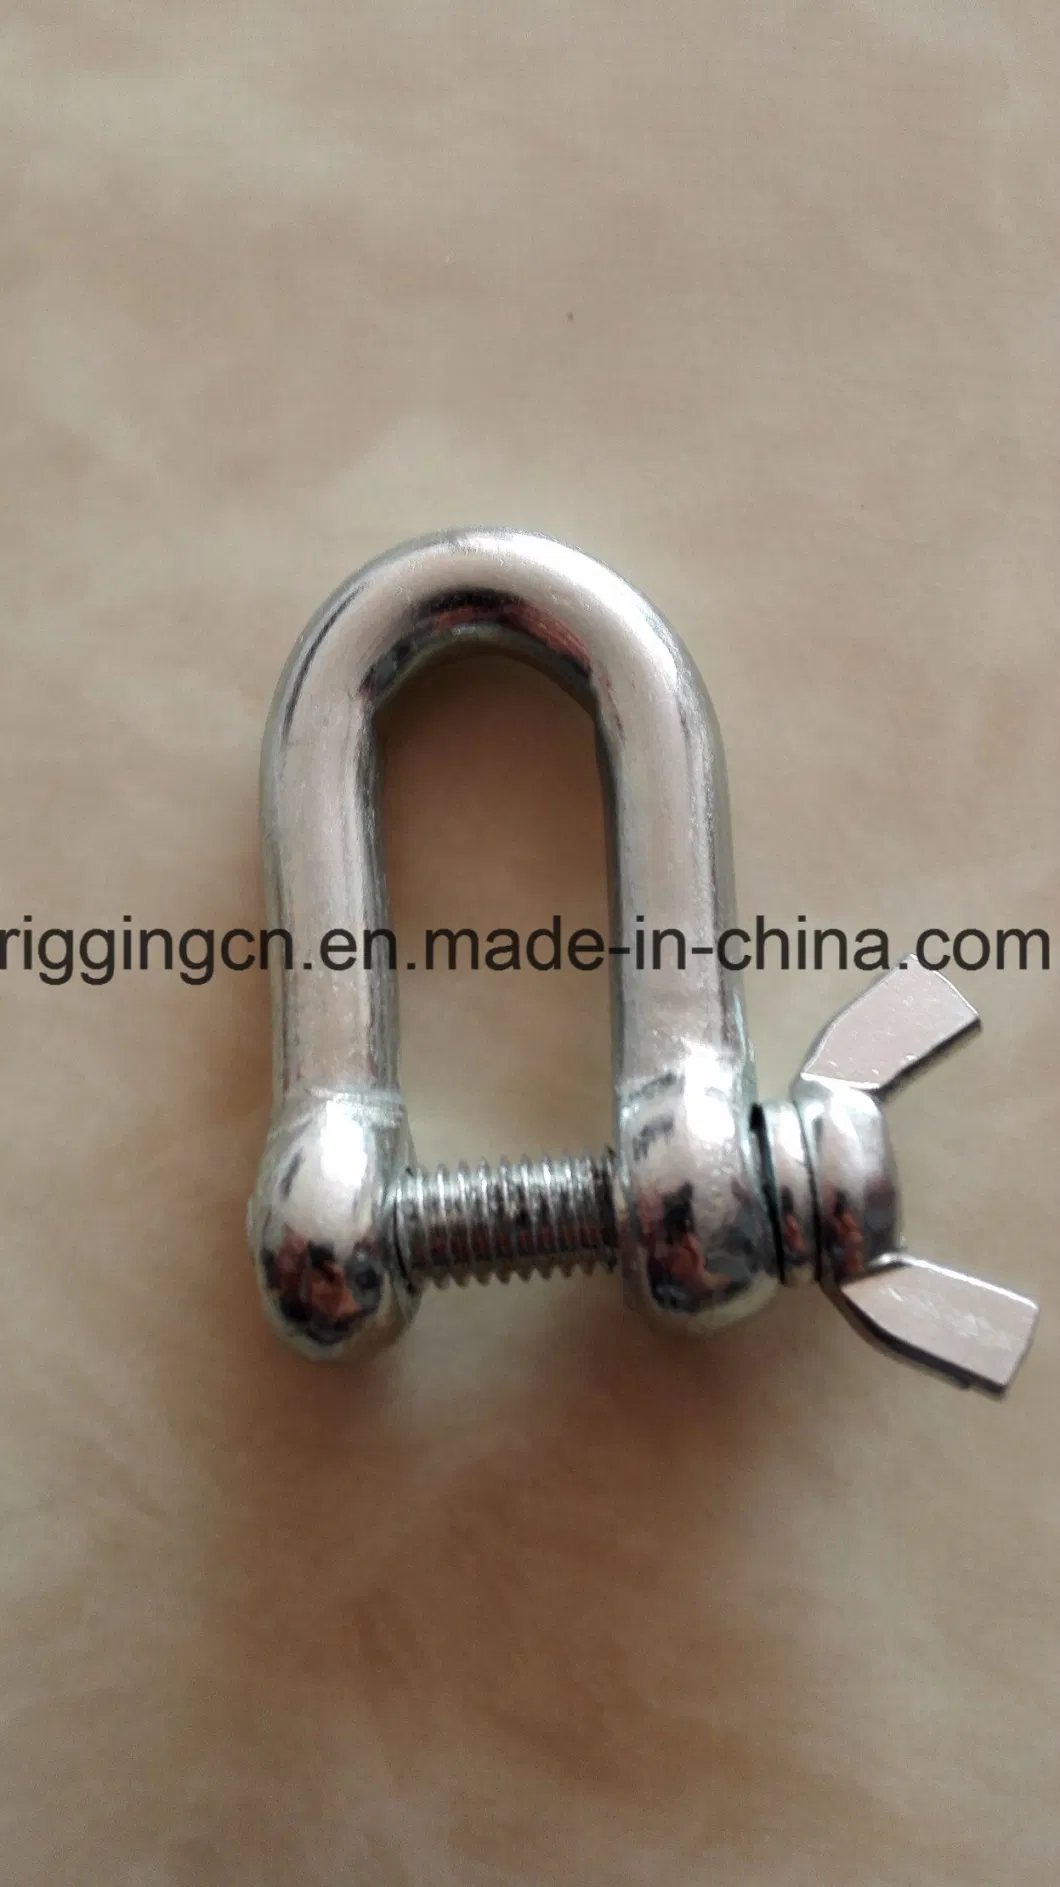 Die Forged High Quality Shackle for Power Line